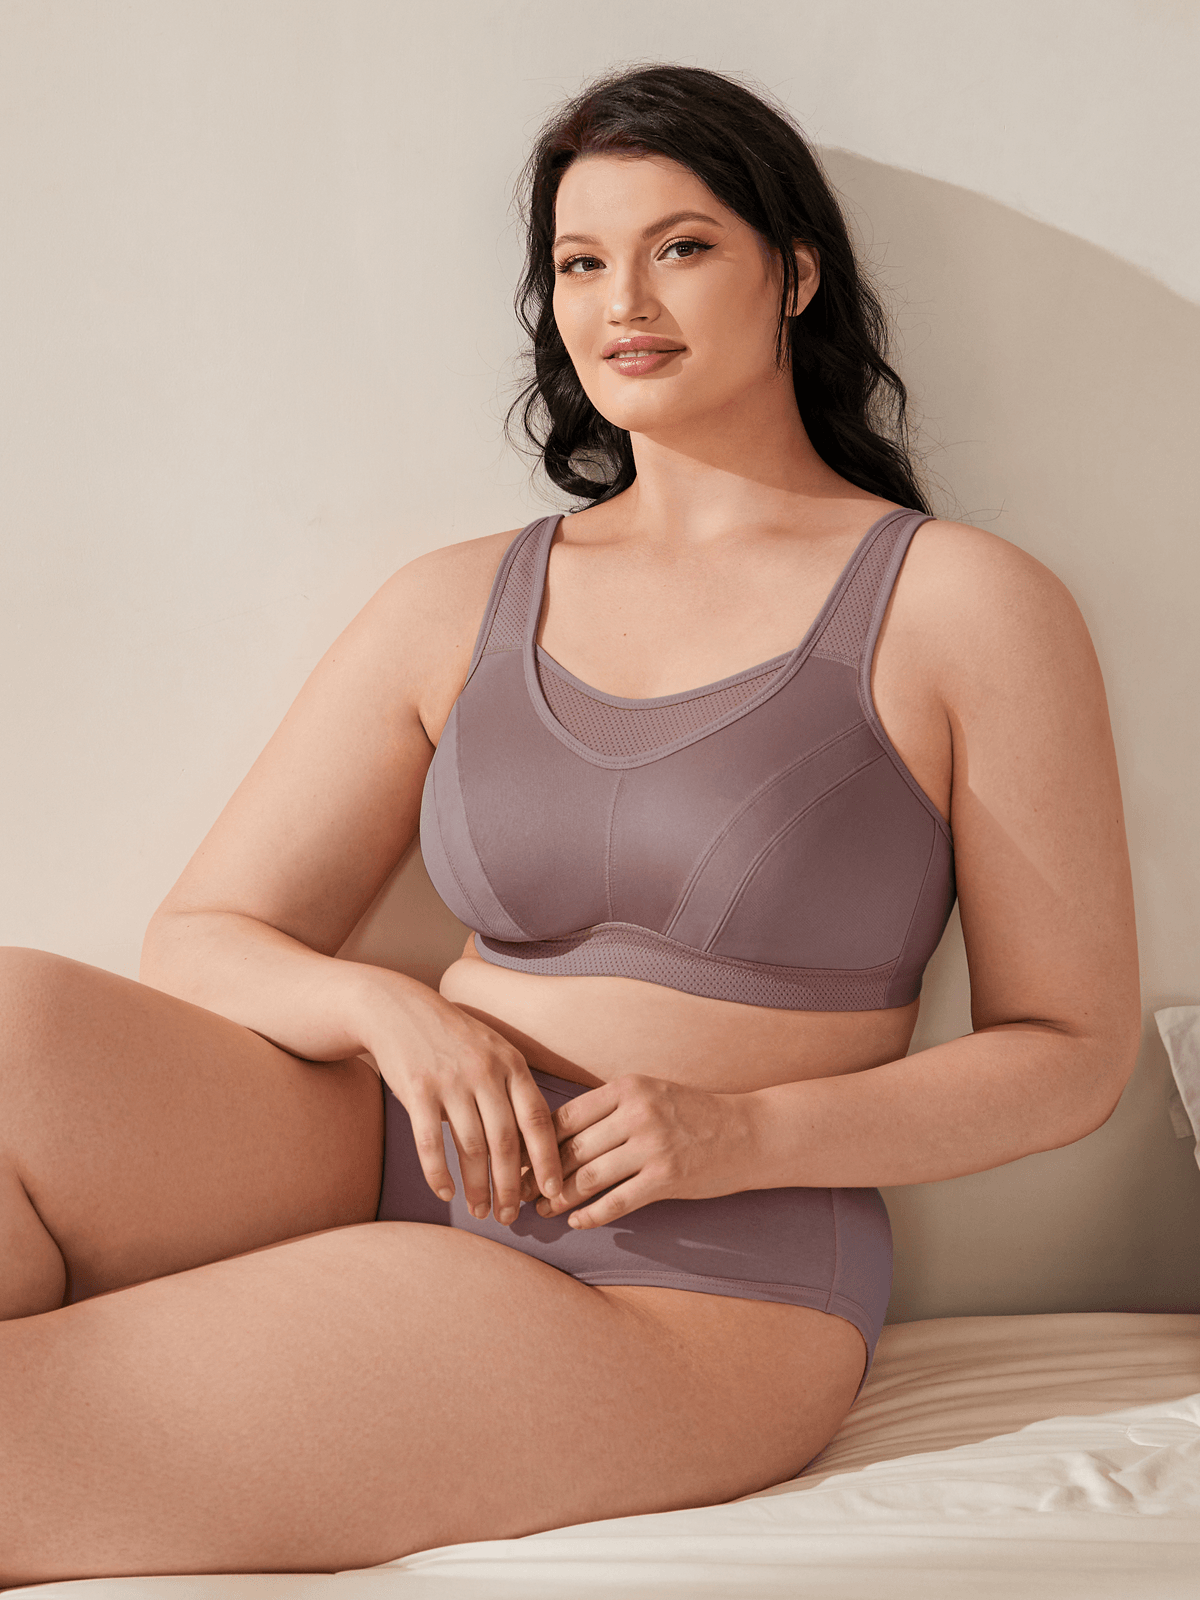 Carbon 38 Plus Size Action Bra 2.0 Sports Bra - $43 - From Lovewhatyoudo